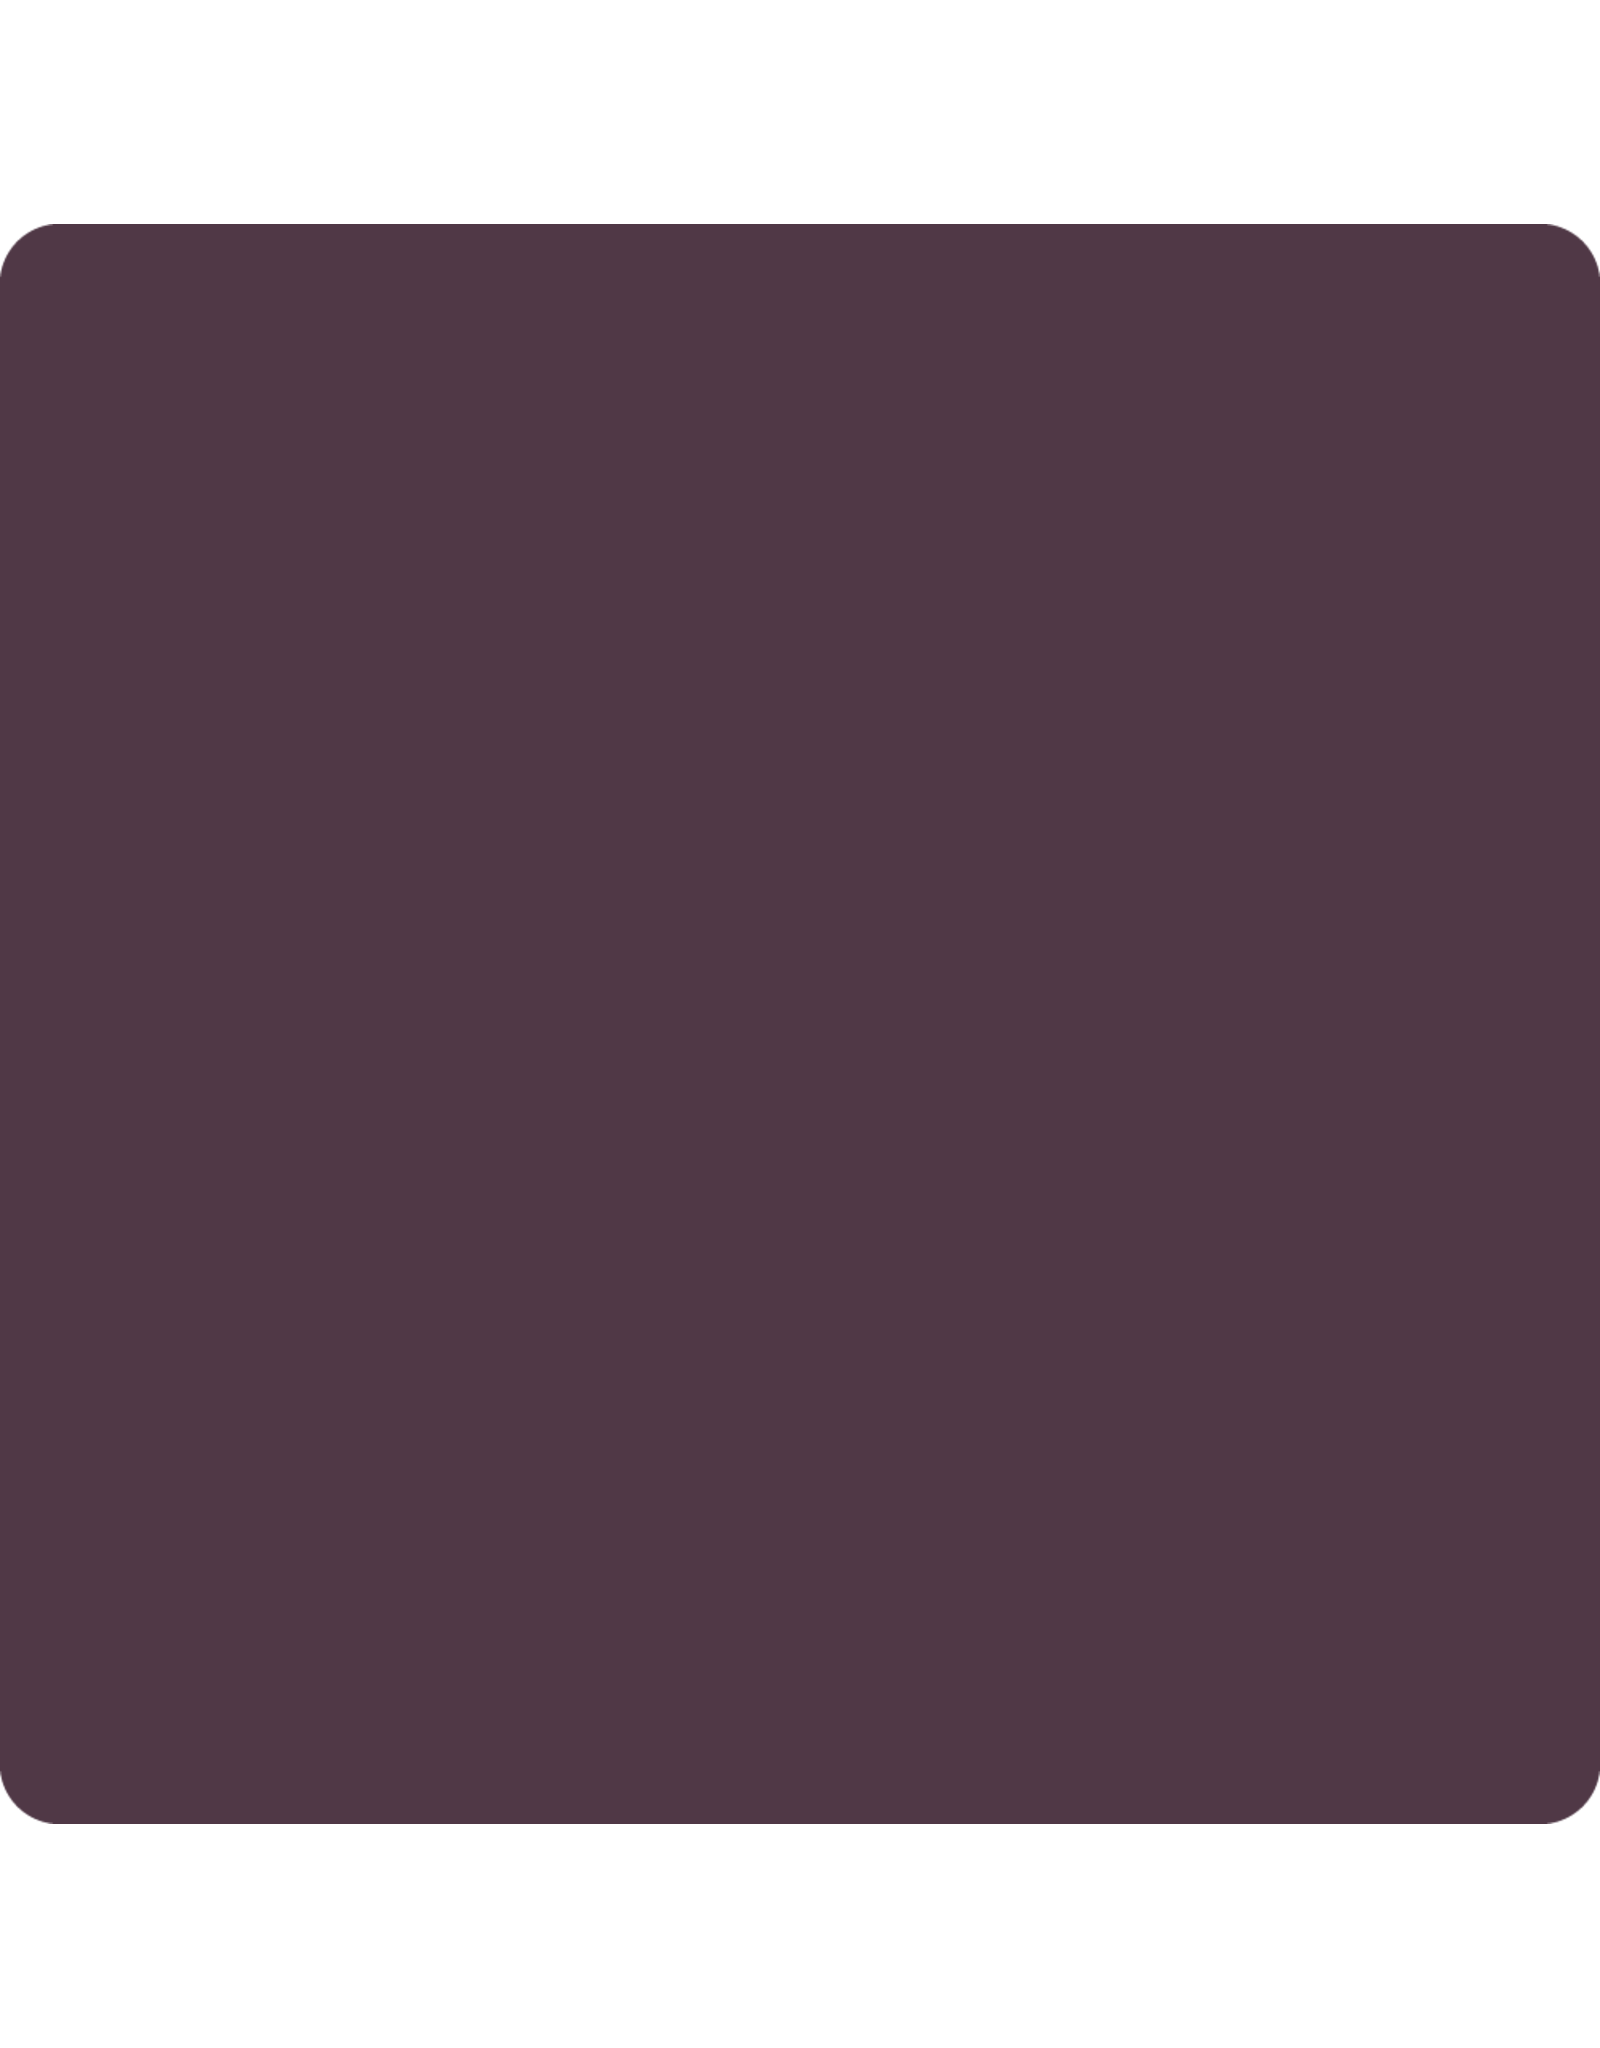 Wise Owl Paint Chalk Synthesis Paint Black Cherry-Pint